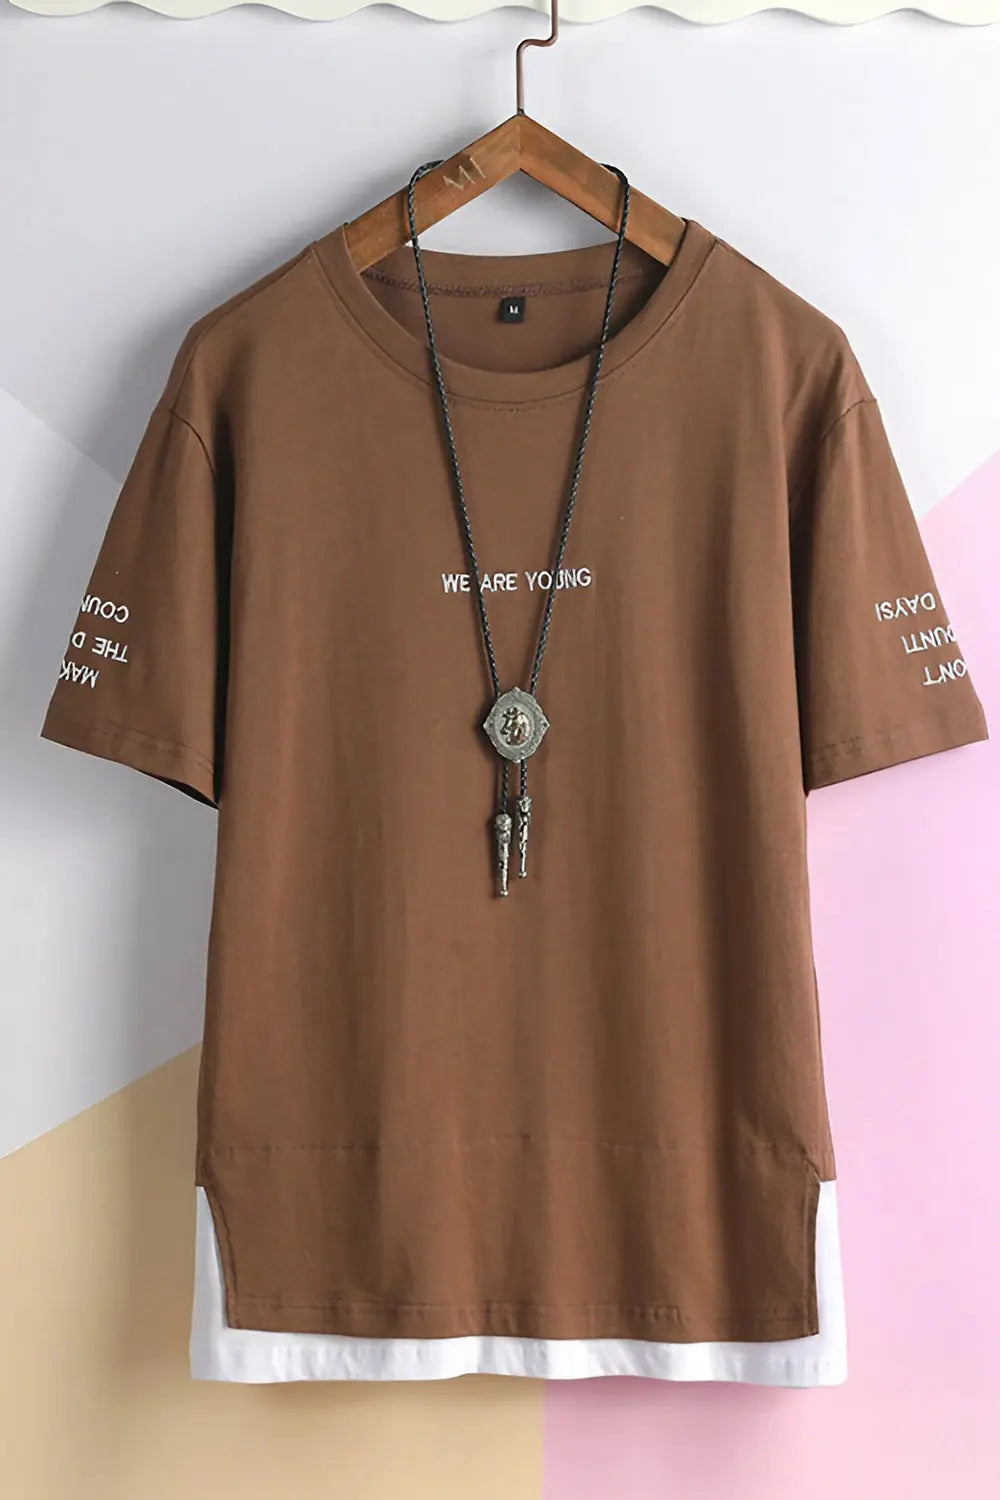 We Are Young T-Shirt - Brown - Strange Clothes